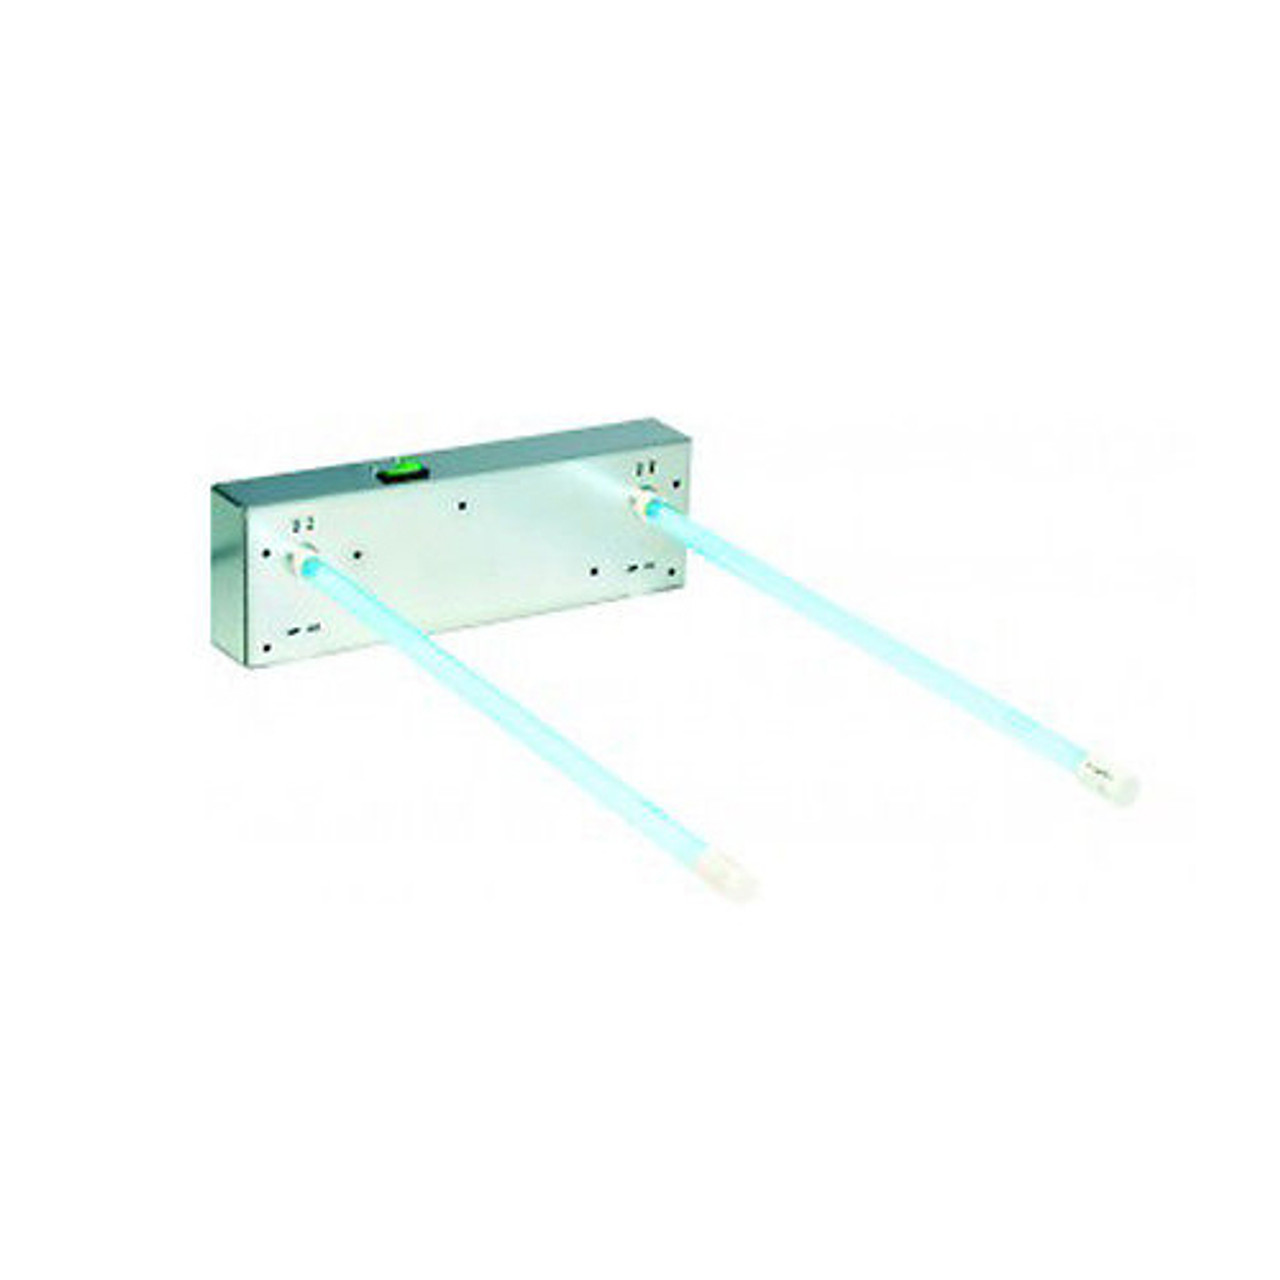 UVC Light Solutions by Steril-Aire